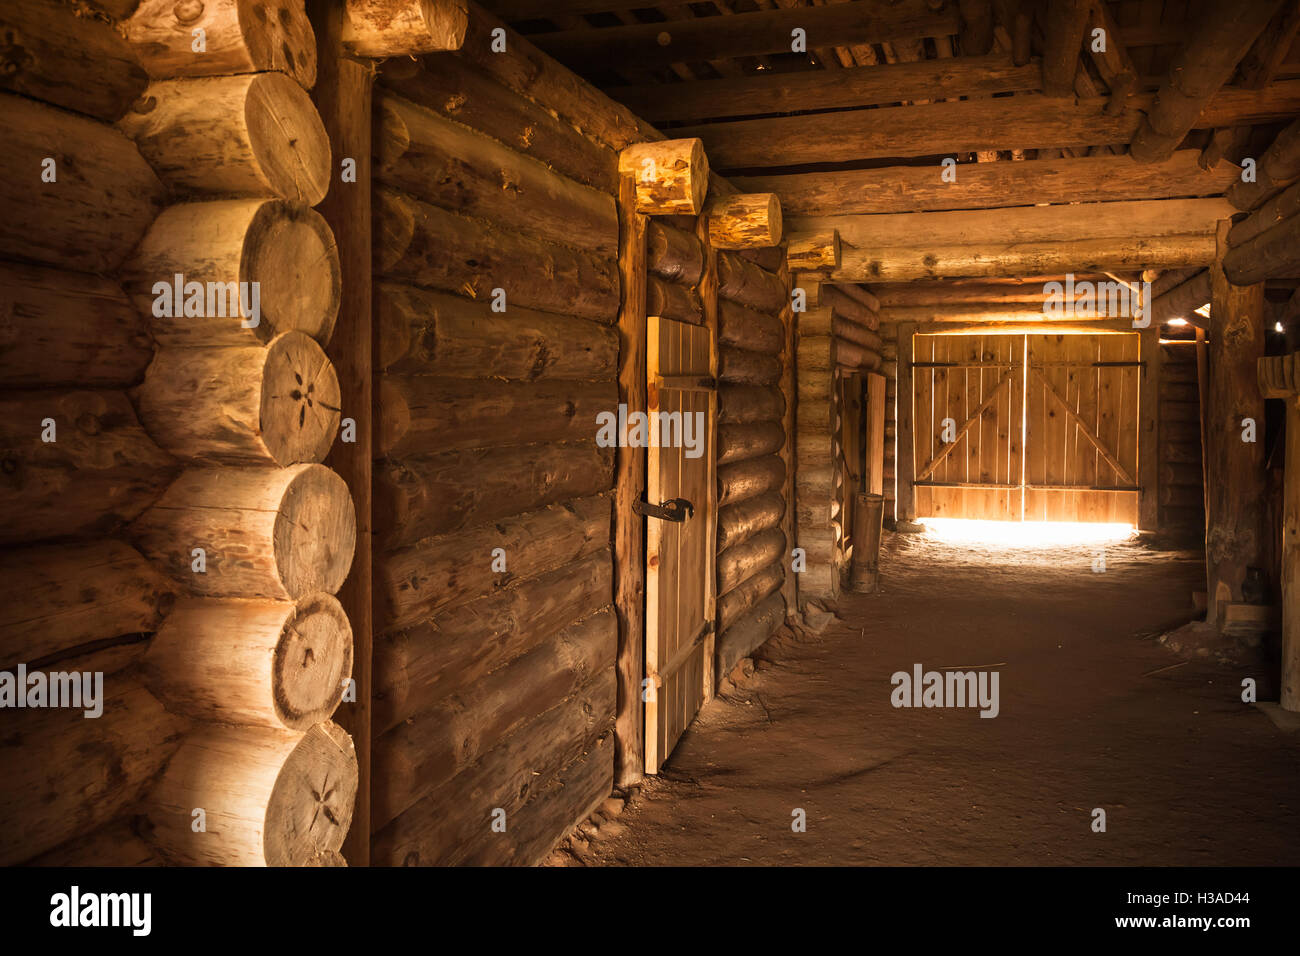 Ancient rural Russian interior, corridor with walls made of rough logs and glowing end Stock Photo